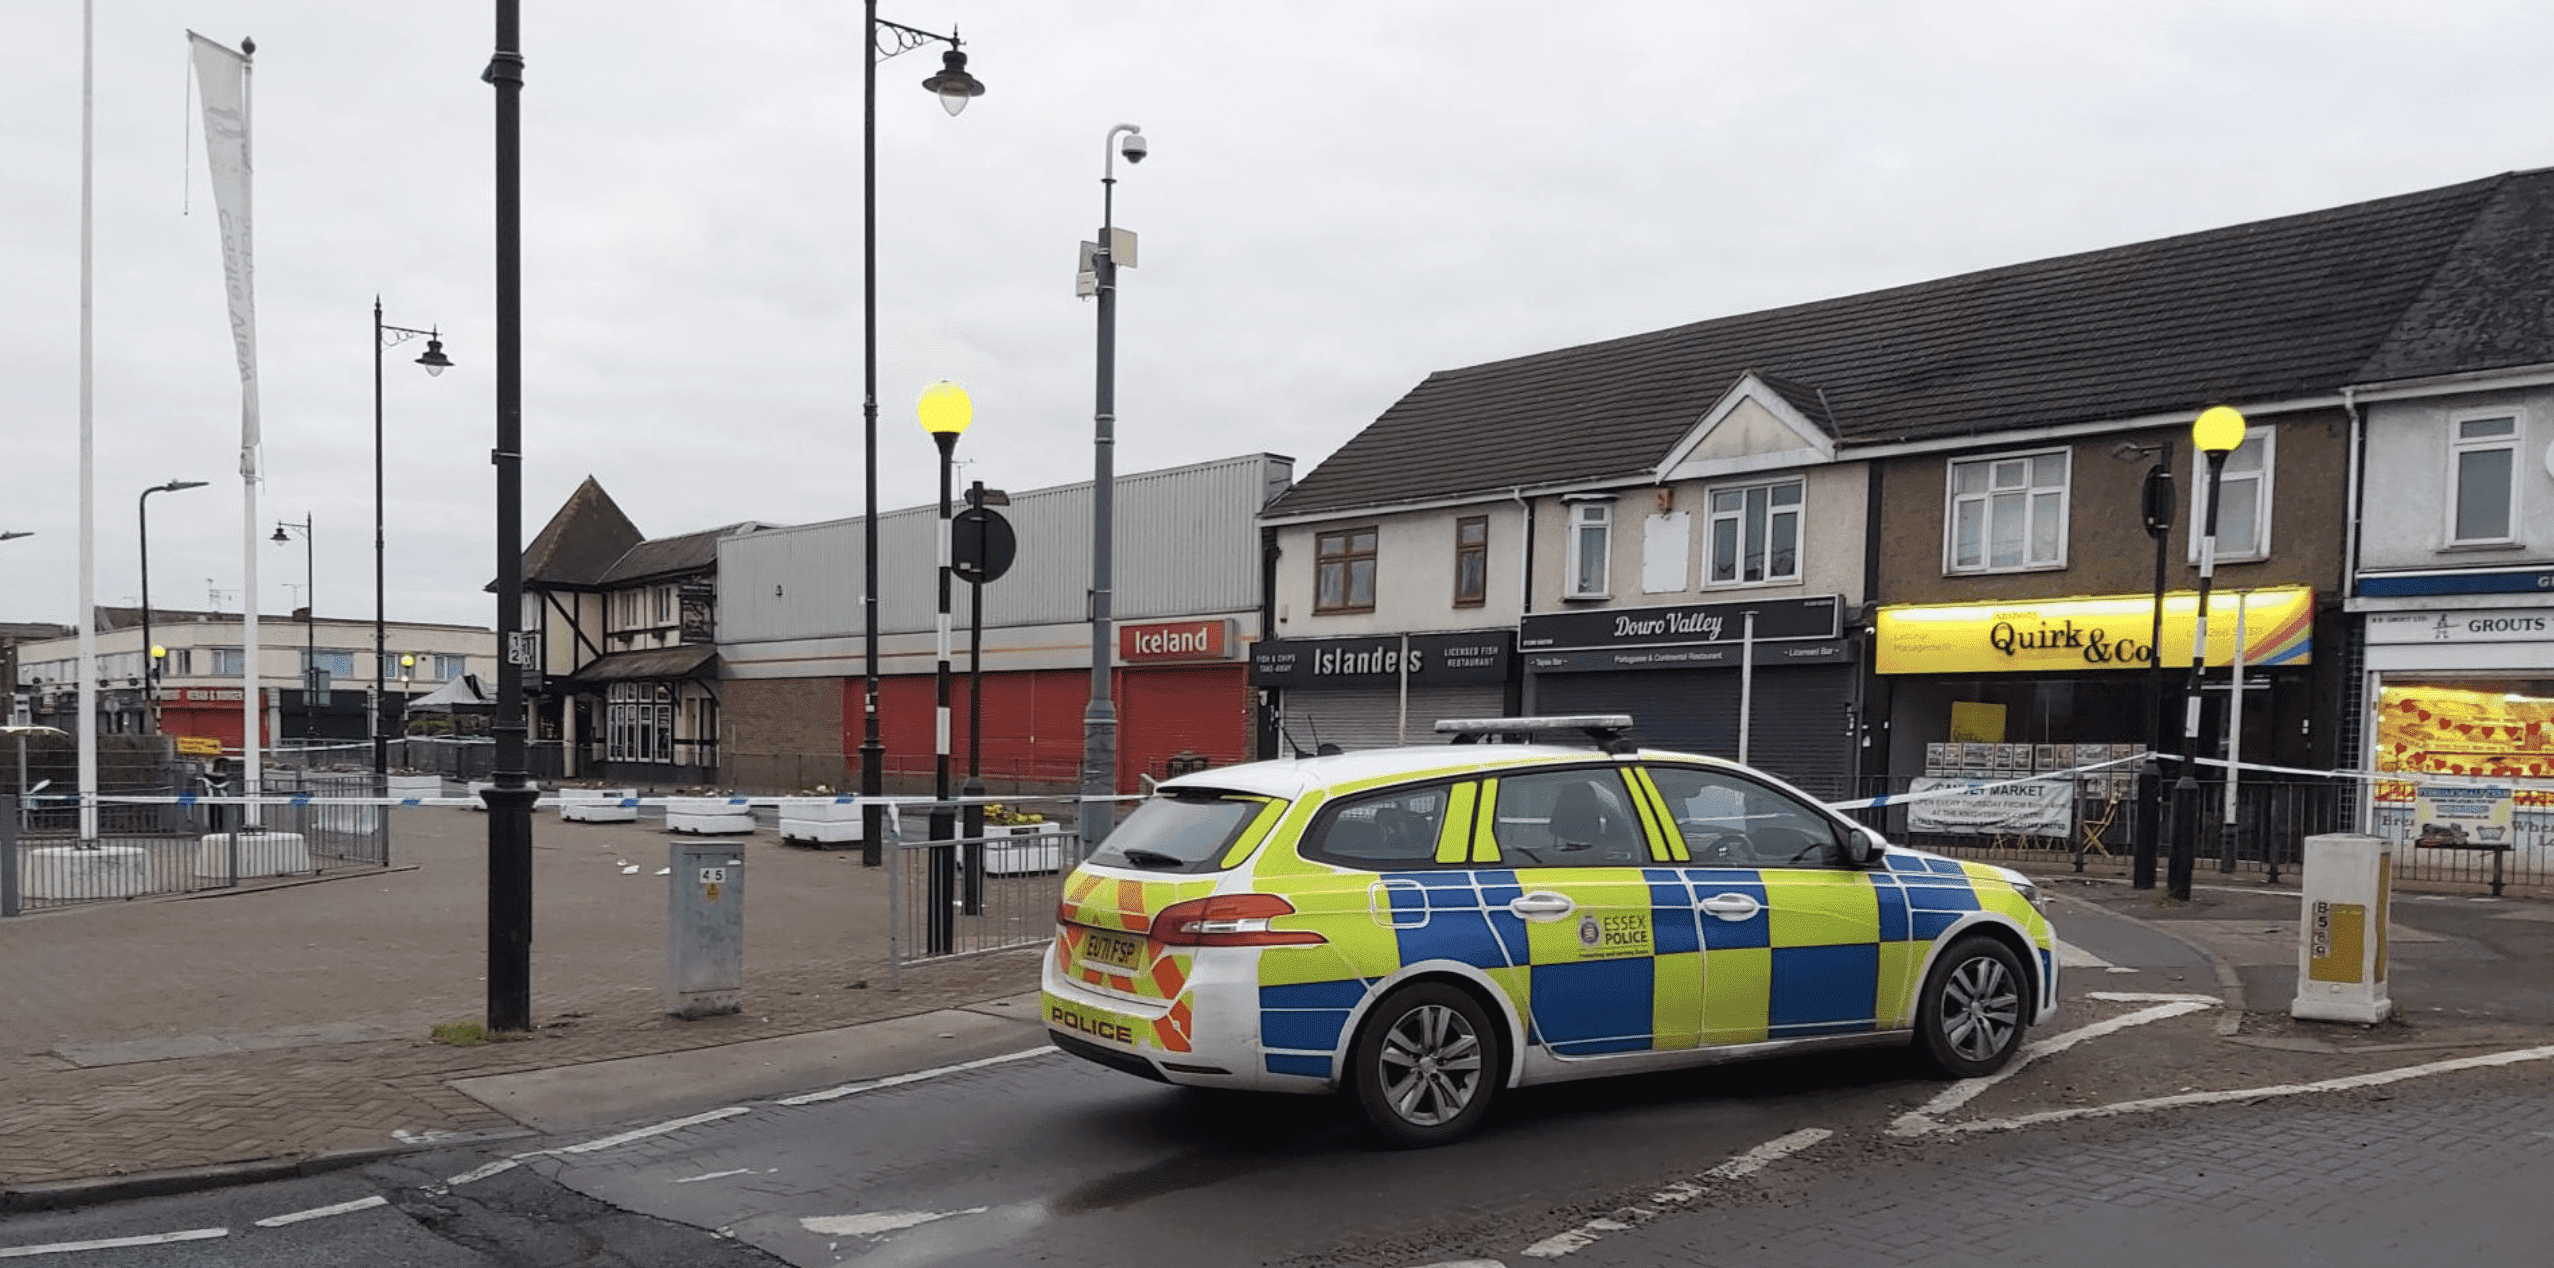 A Murder Investigation Has Started Following The Death Of A Man On Canvey Island